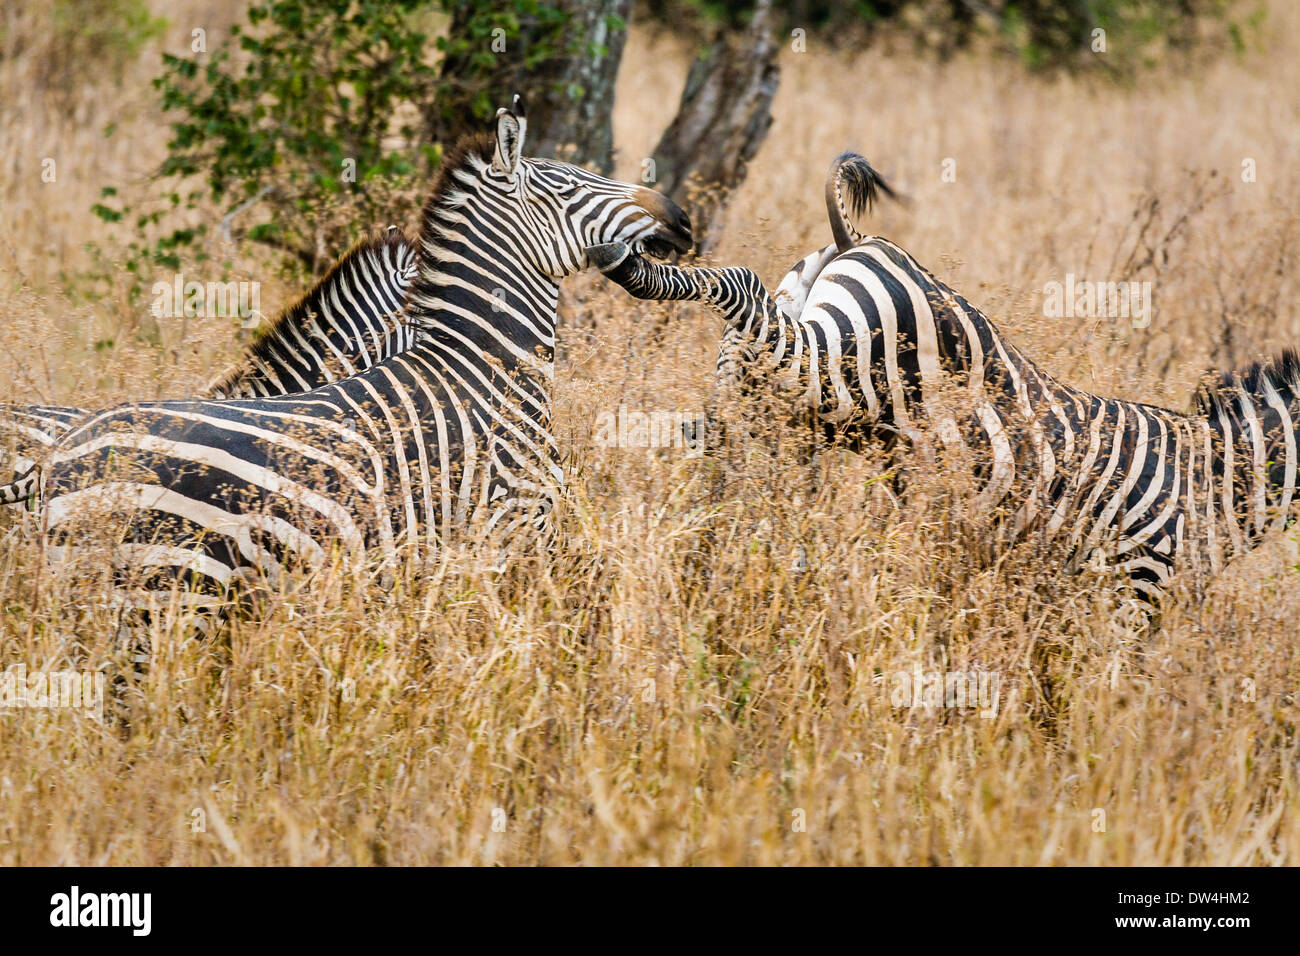 One zebra kicking another in the jaw. Stock Photo